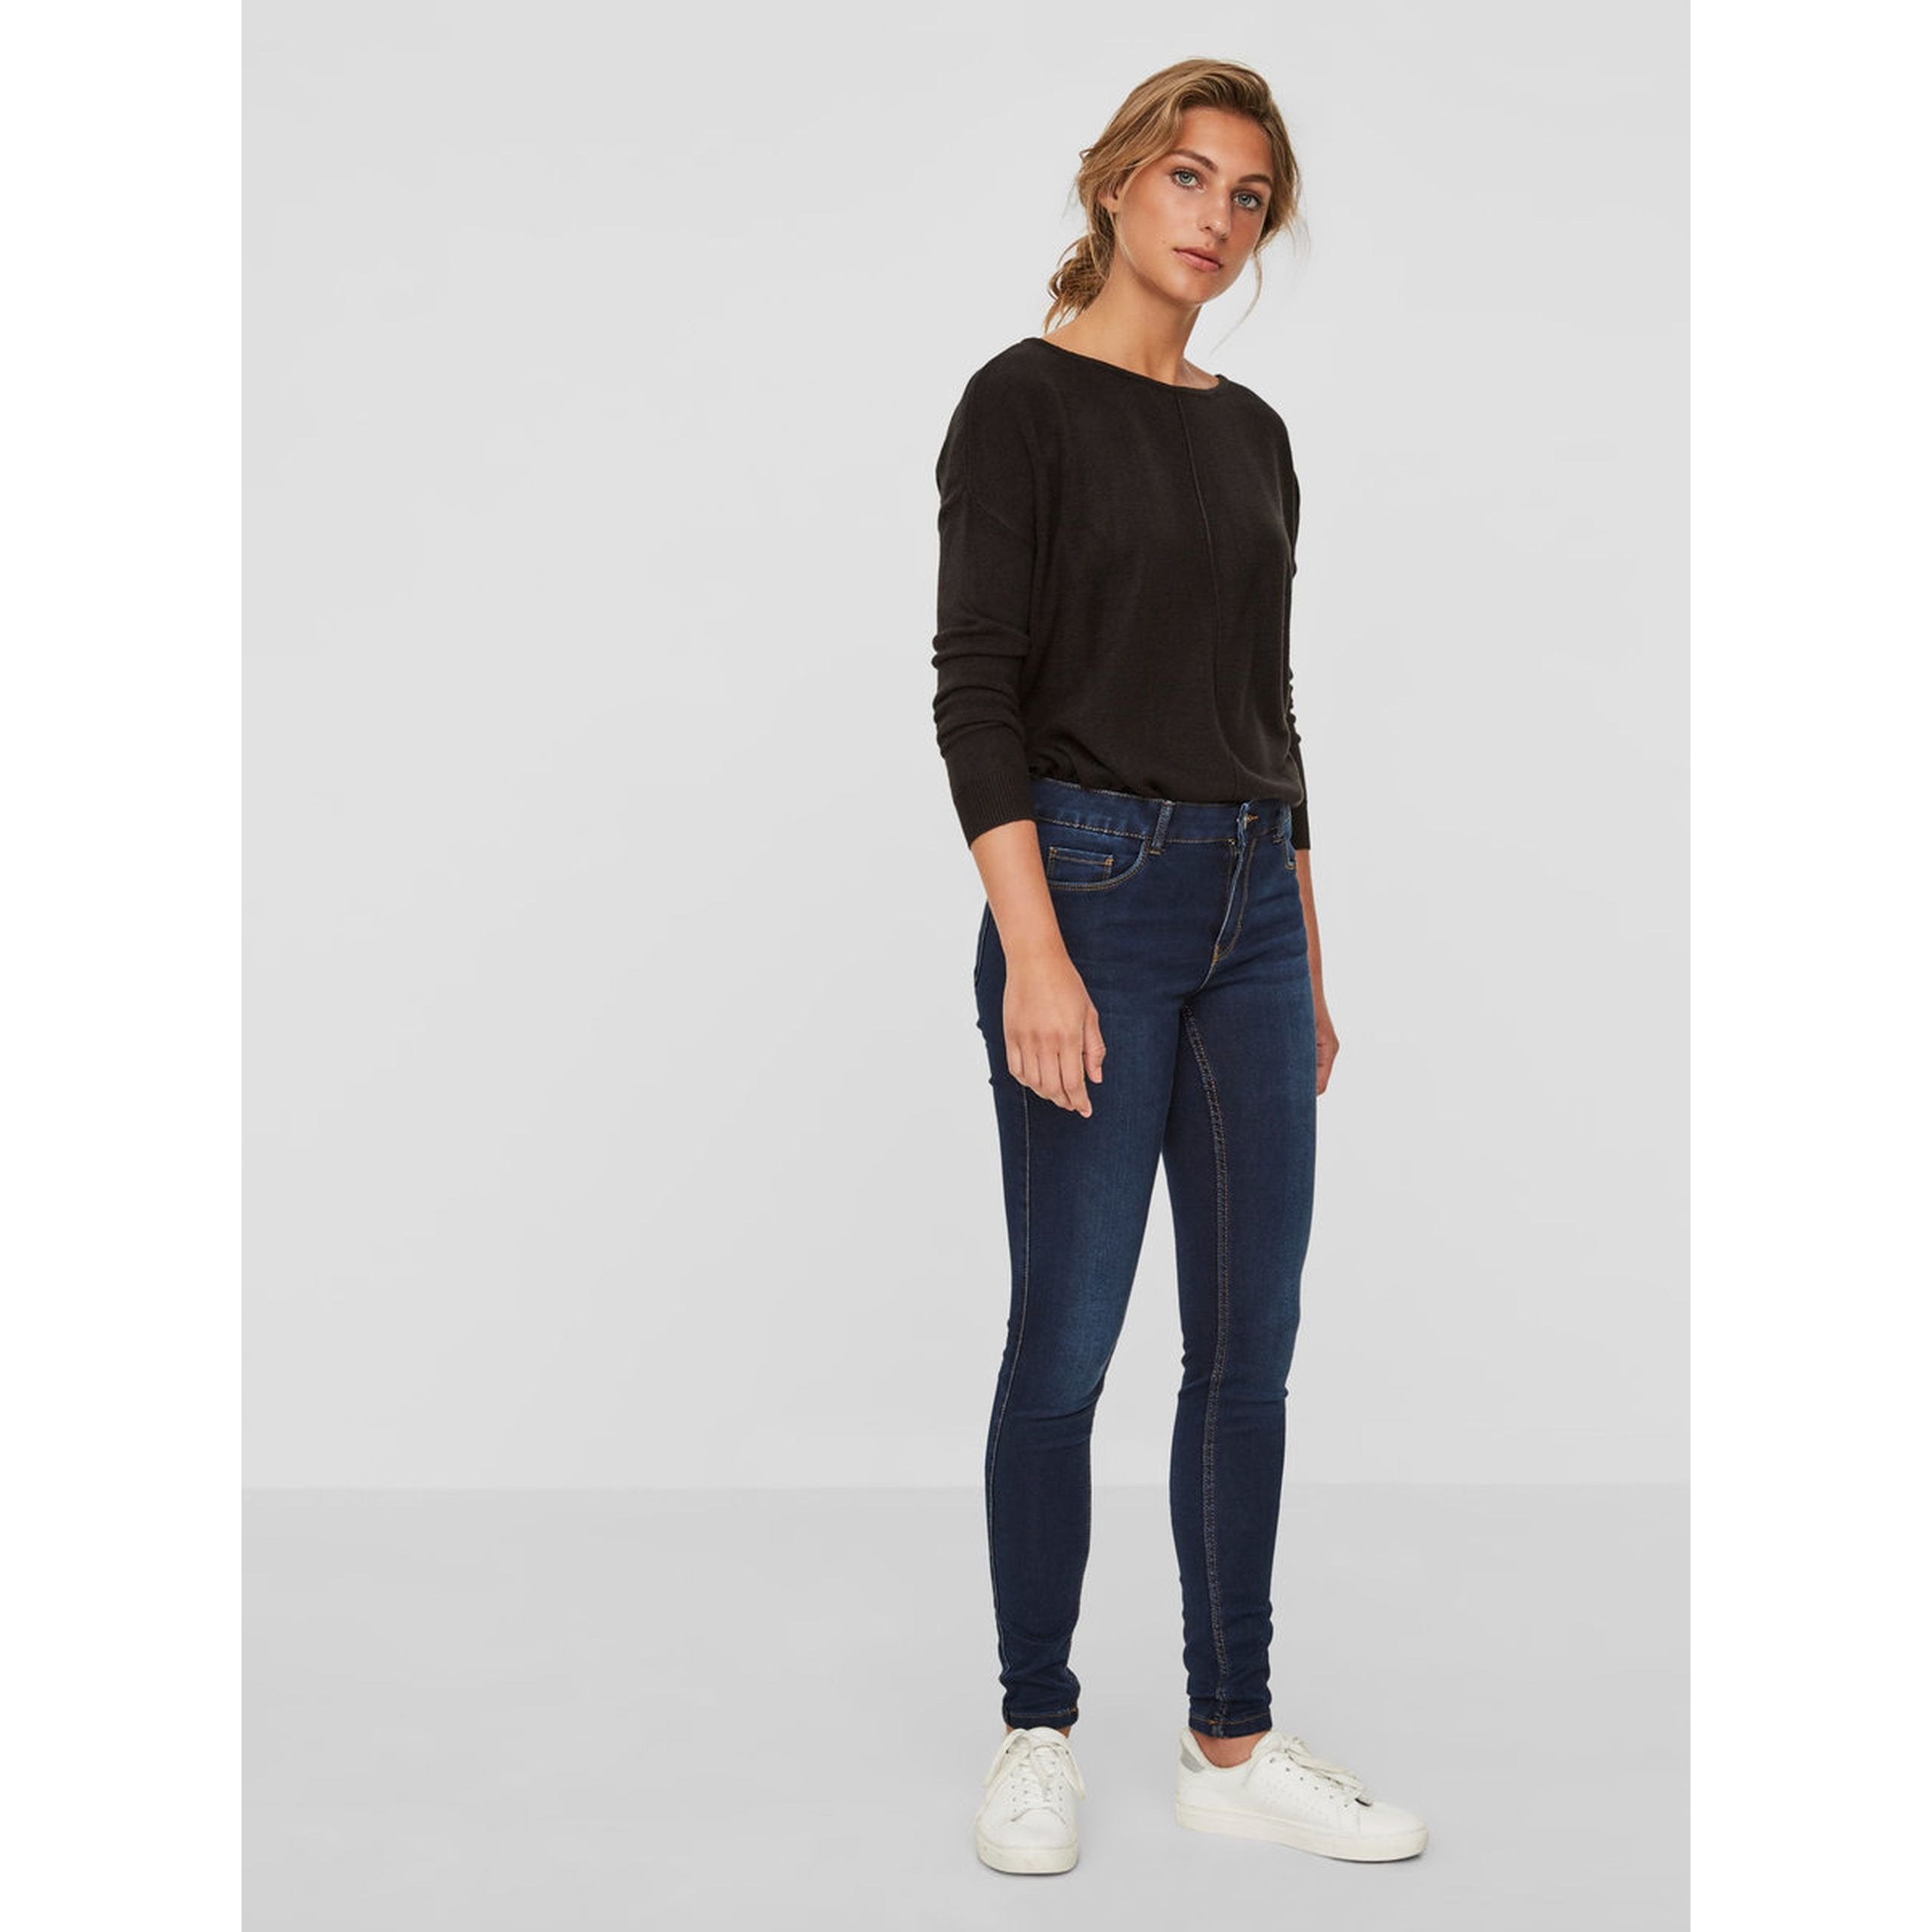 Vero Moda Jeans Review - Best in Comfort Style – The Cope